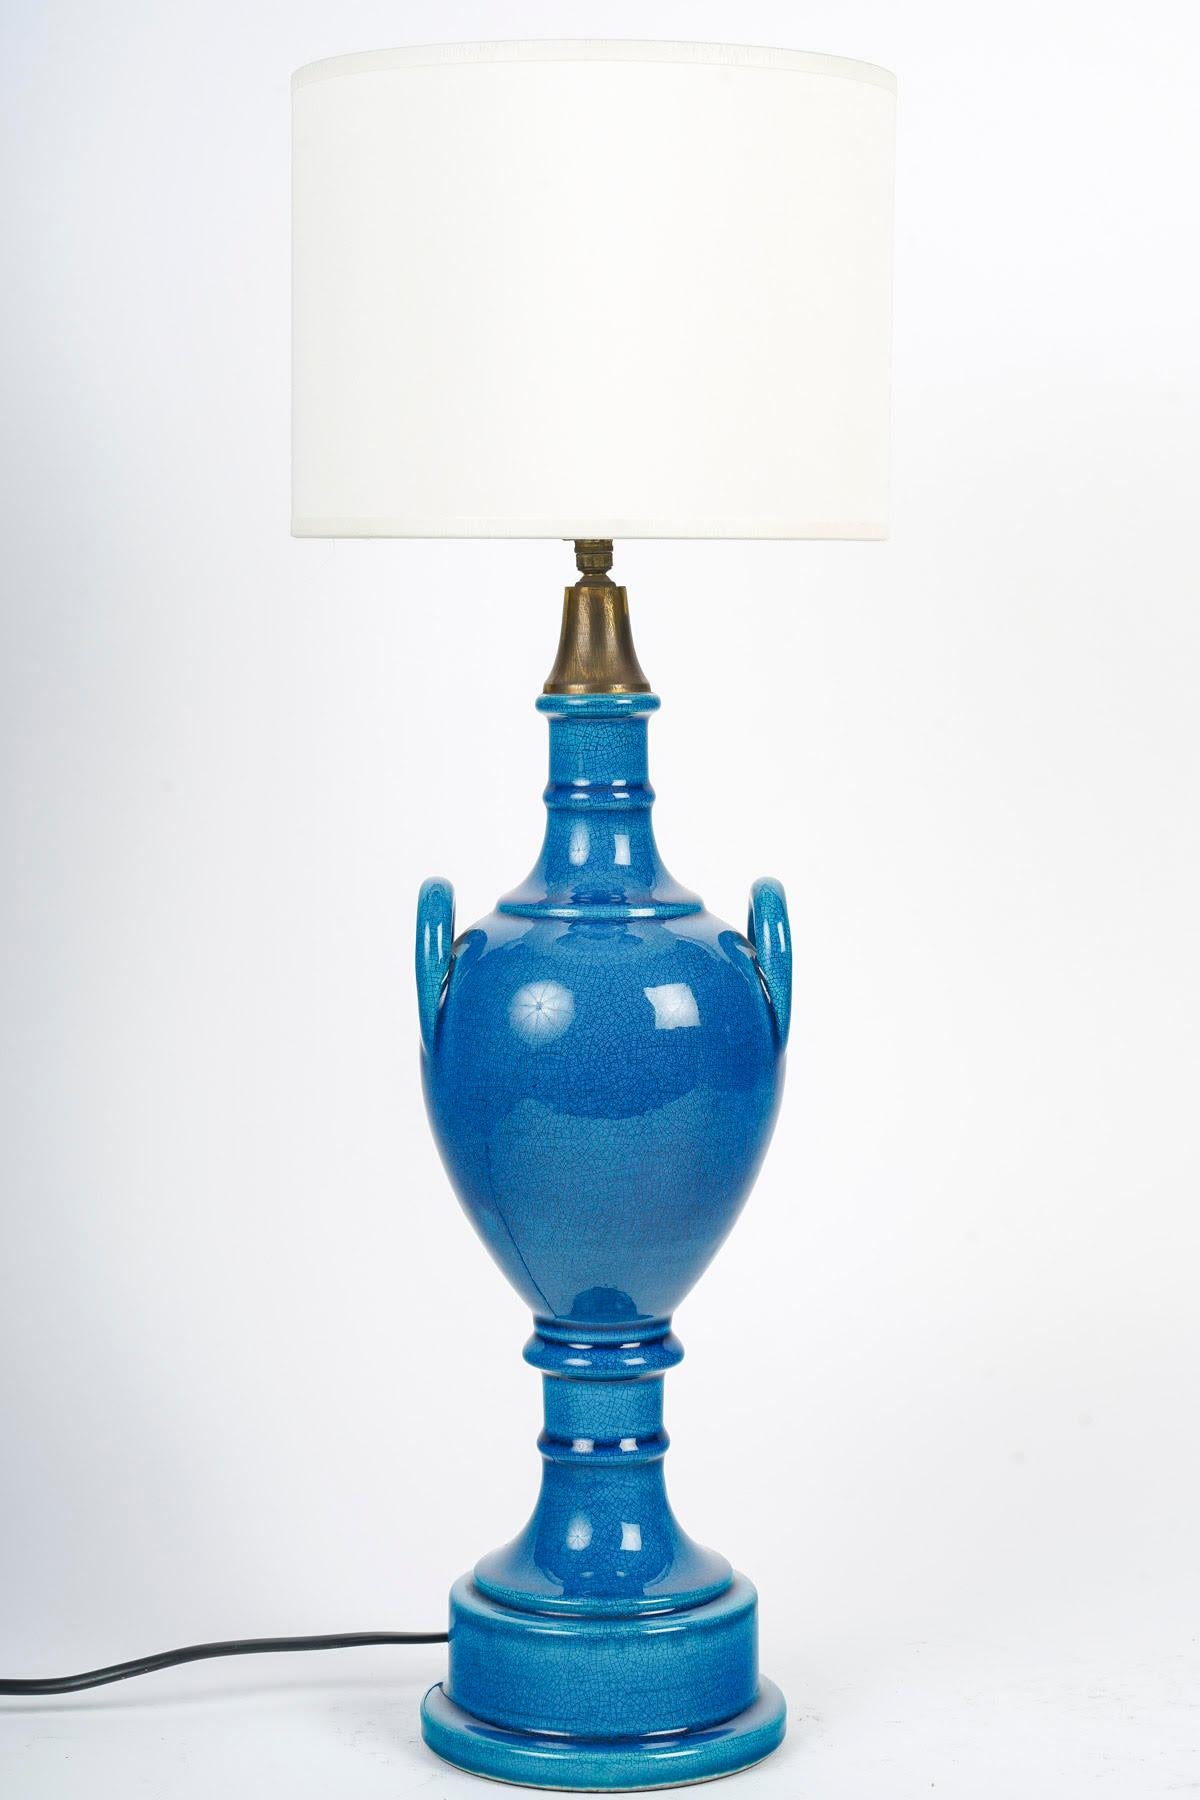 Modern Pair of Table Lamps by Pol Chambost (1906-1983), Blue Glazed Earthenware. For Sale